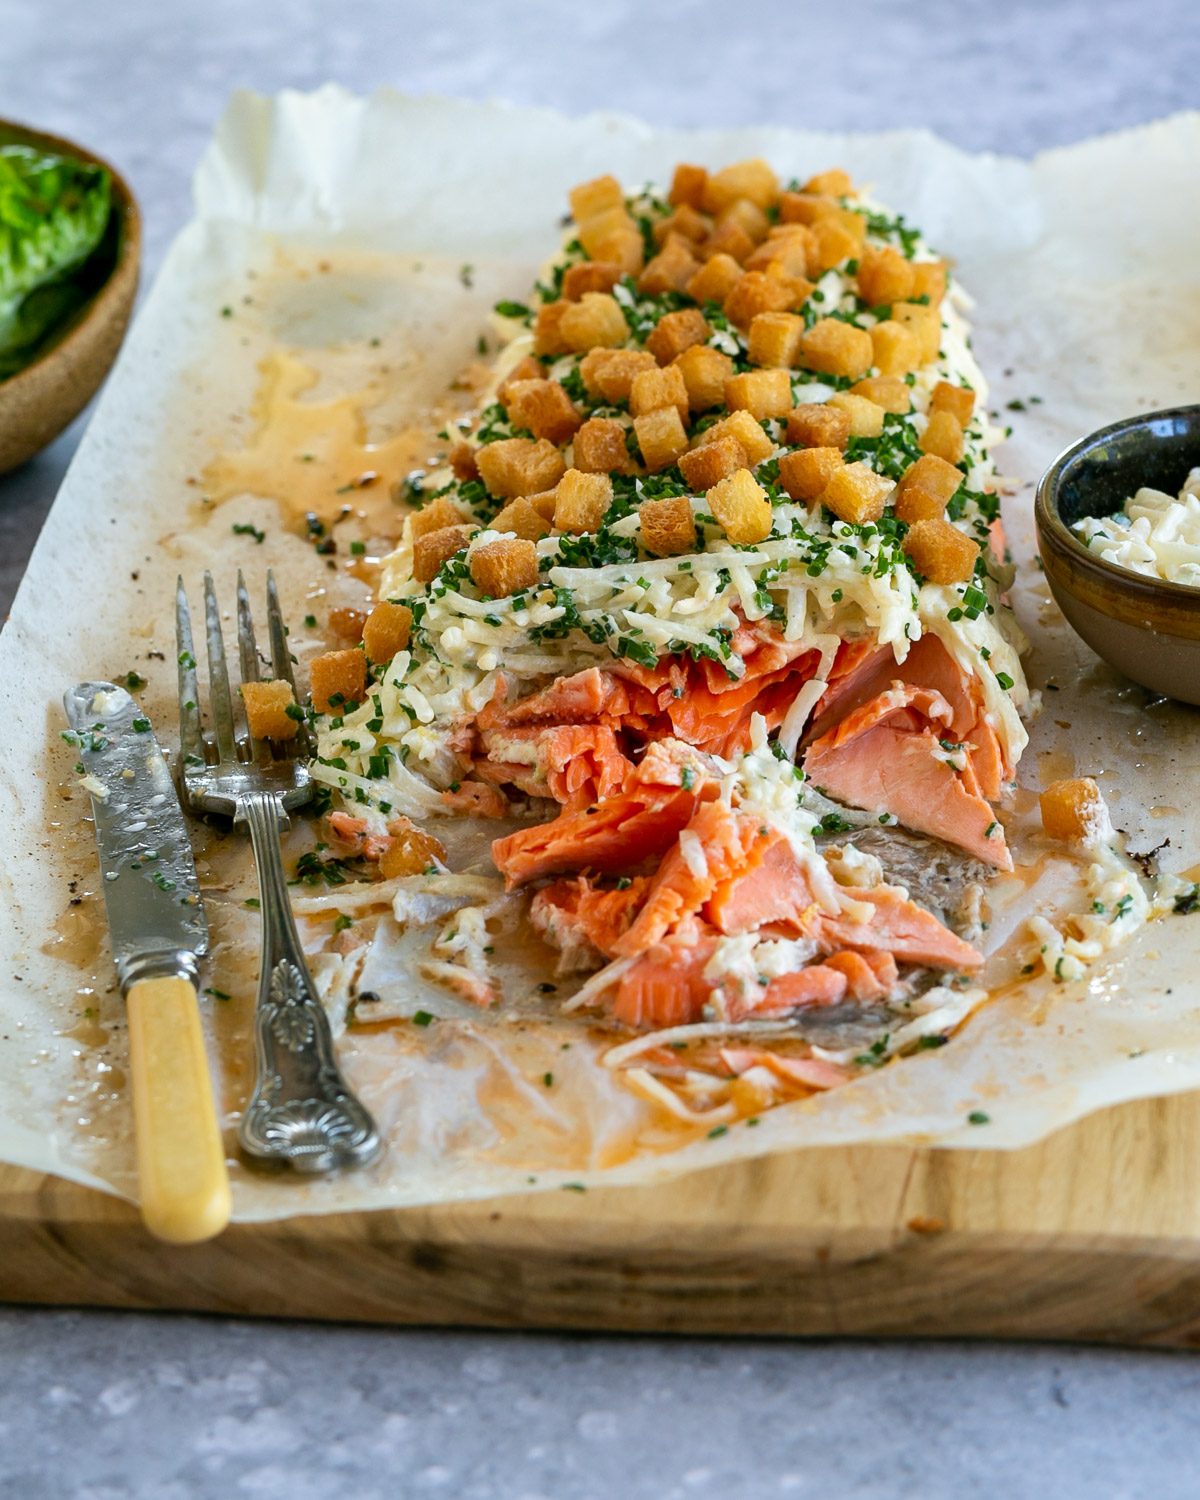 Flaked baked trout fillet served on a wooden board